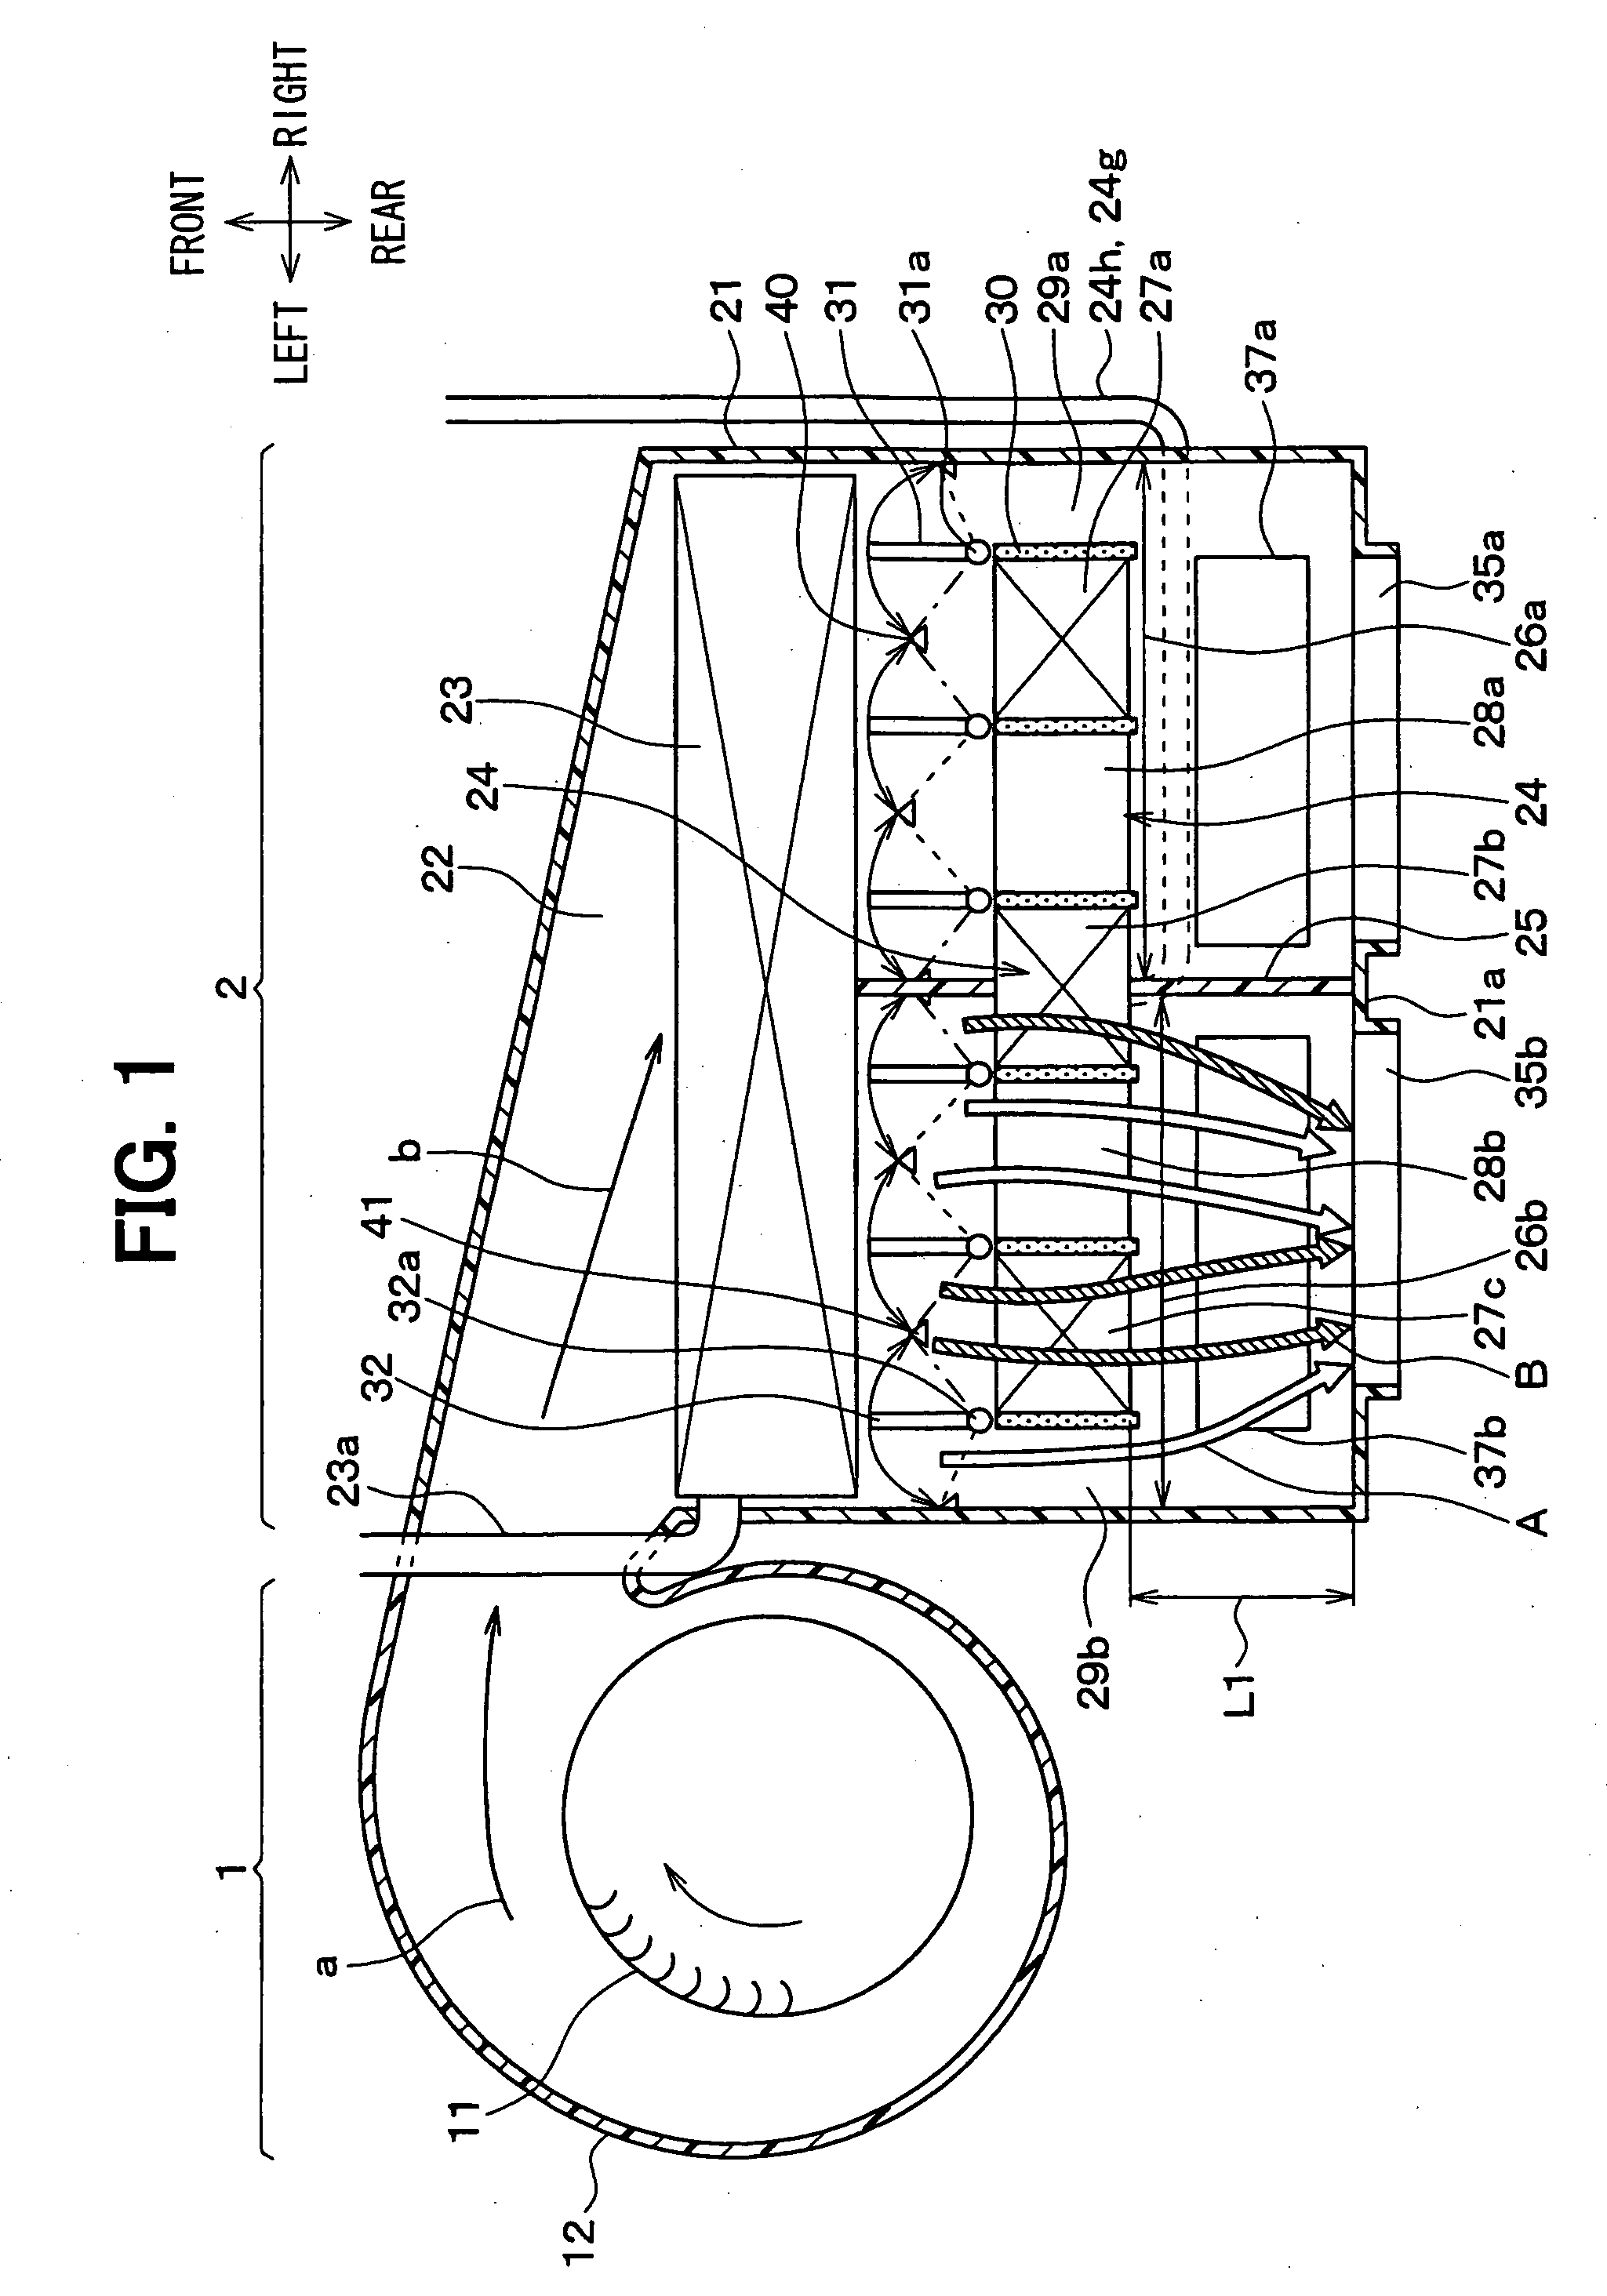 Heat exchanger and air conditioner